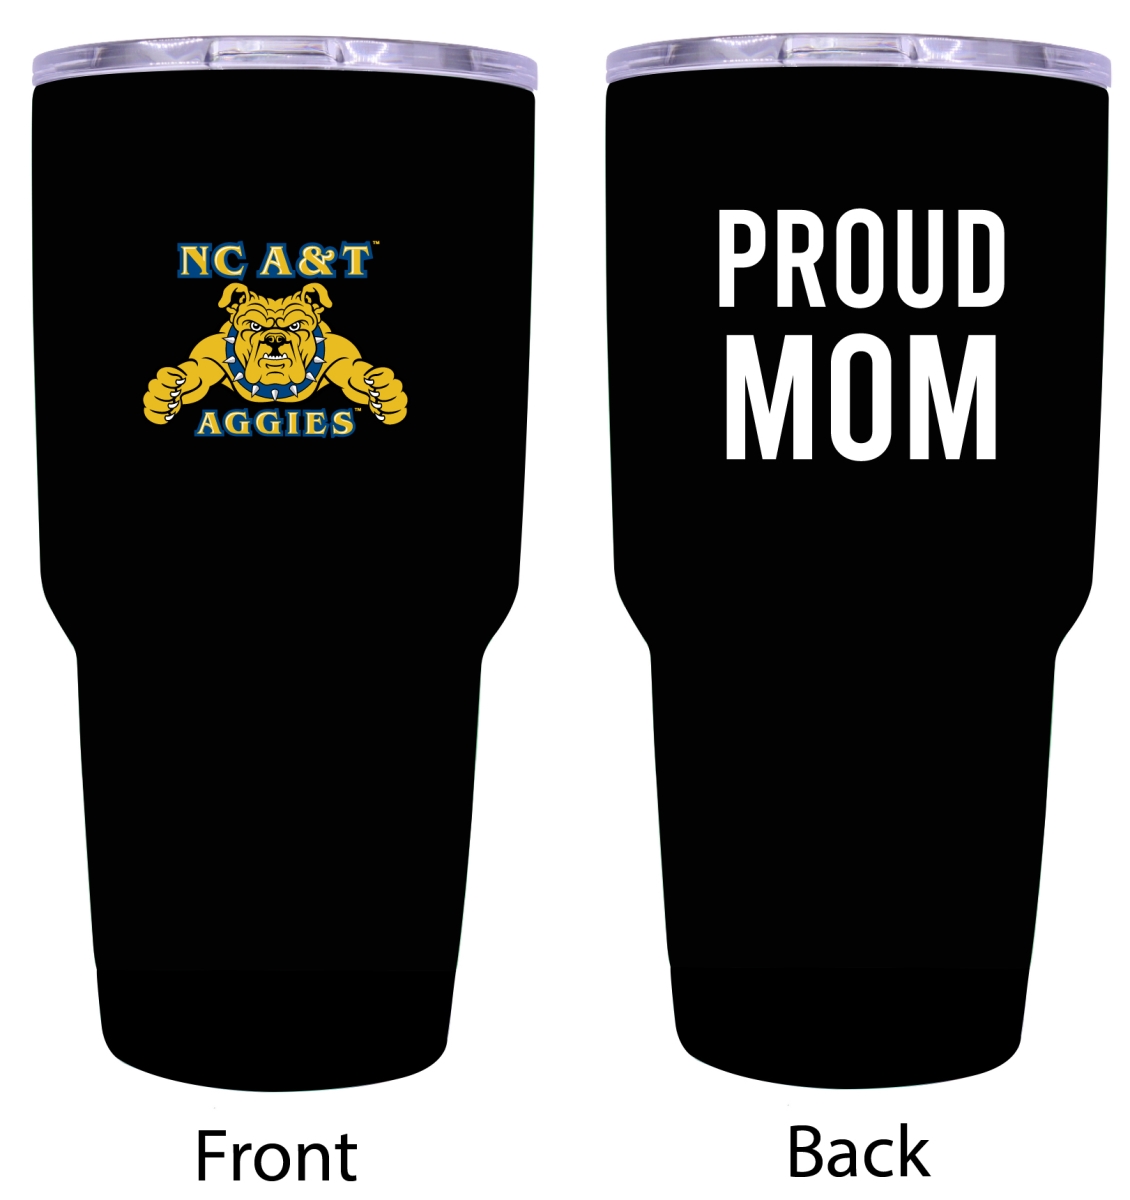 Picture of R & R Imports ITB-C-NCAT20 MOM North Carolina A&T State Aggies Proud Mom 20 oz Insulated Stainless Steel Tumblers